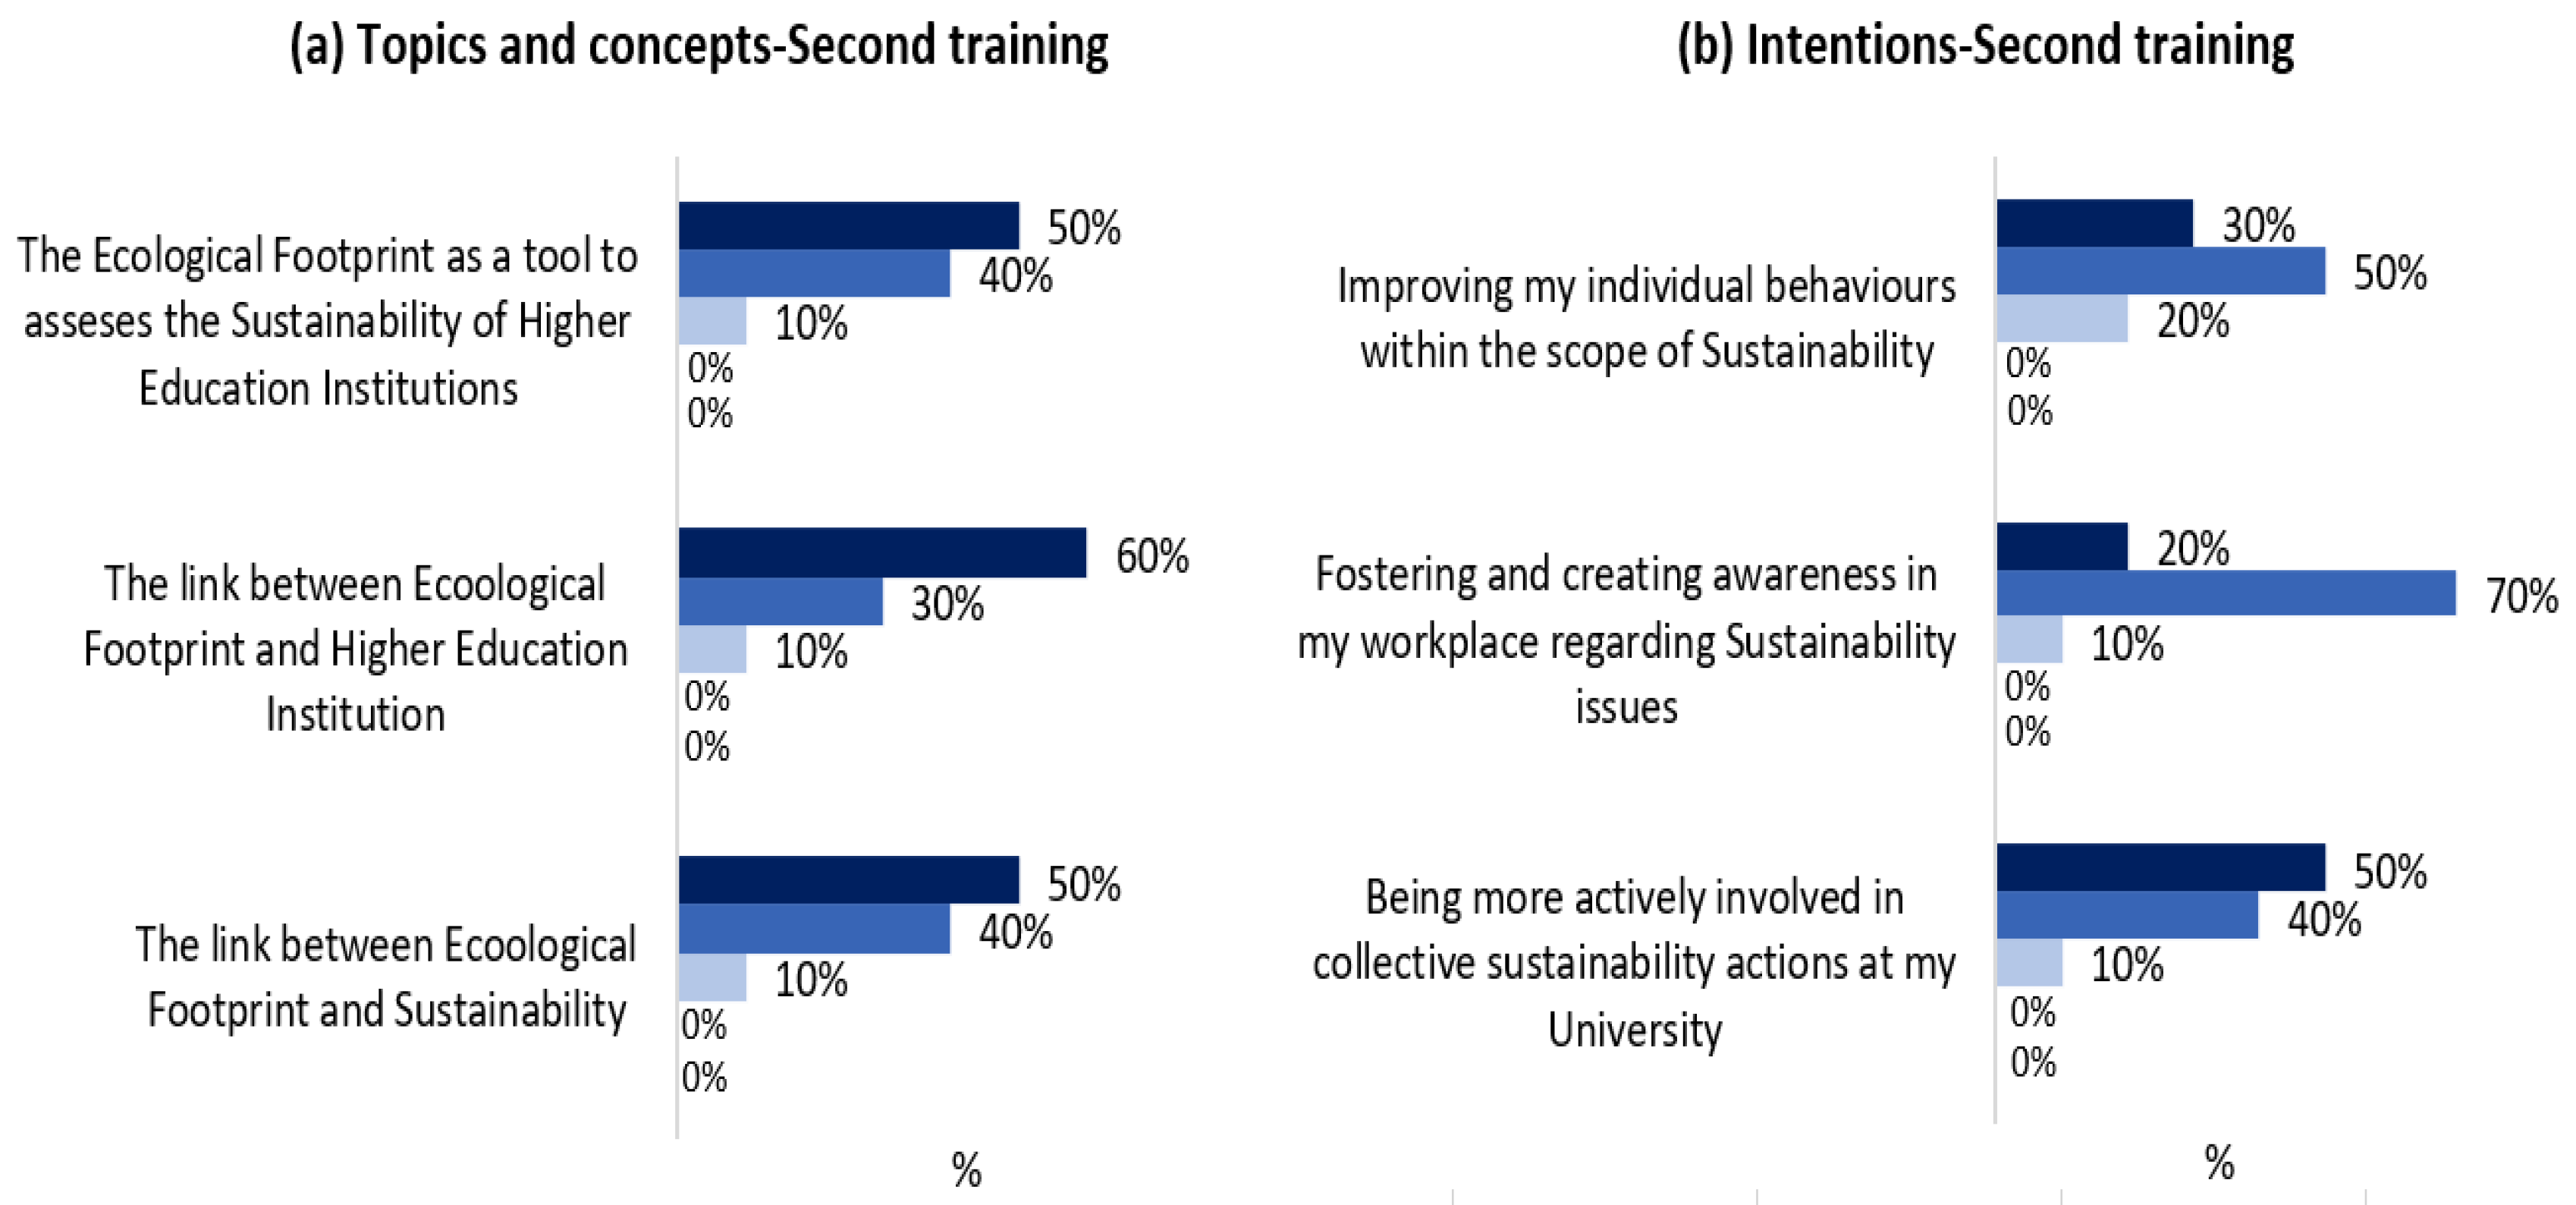 Catarina Ferreira on LinkedIn: How to create training programs that impact  the organization's results